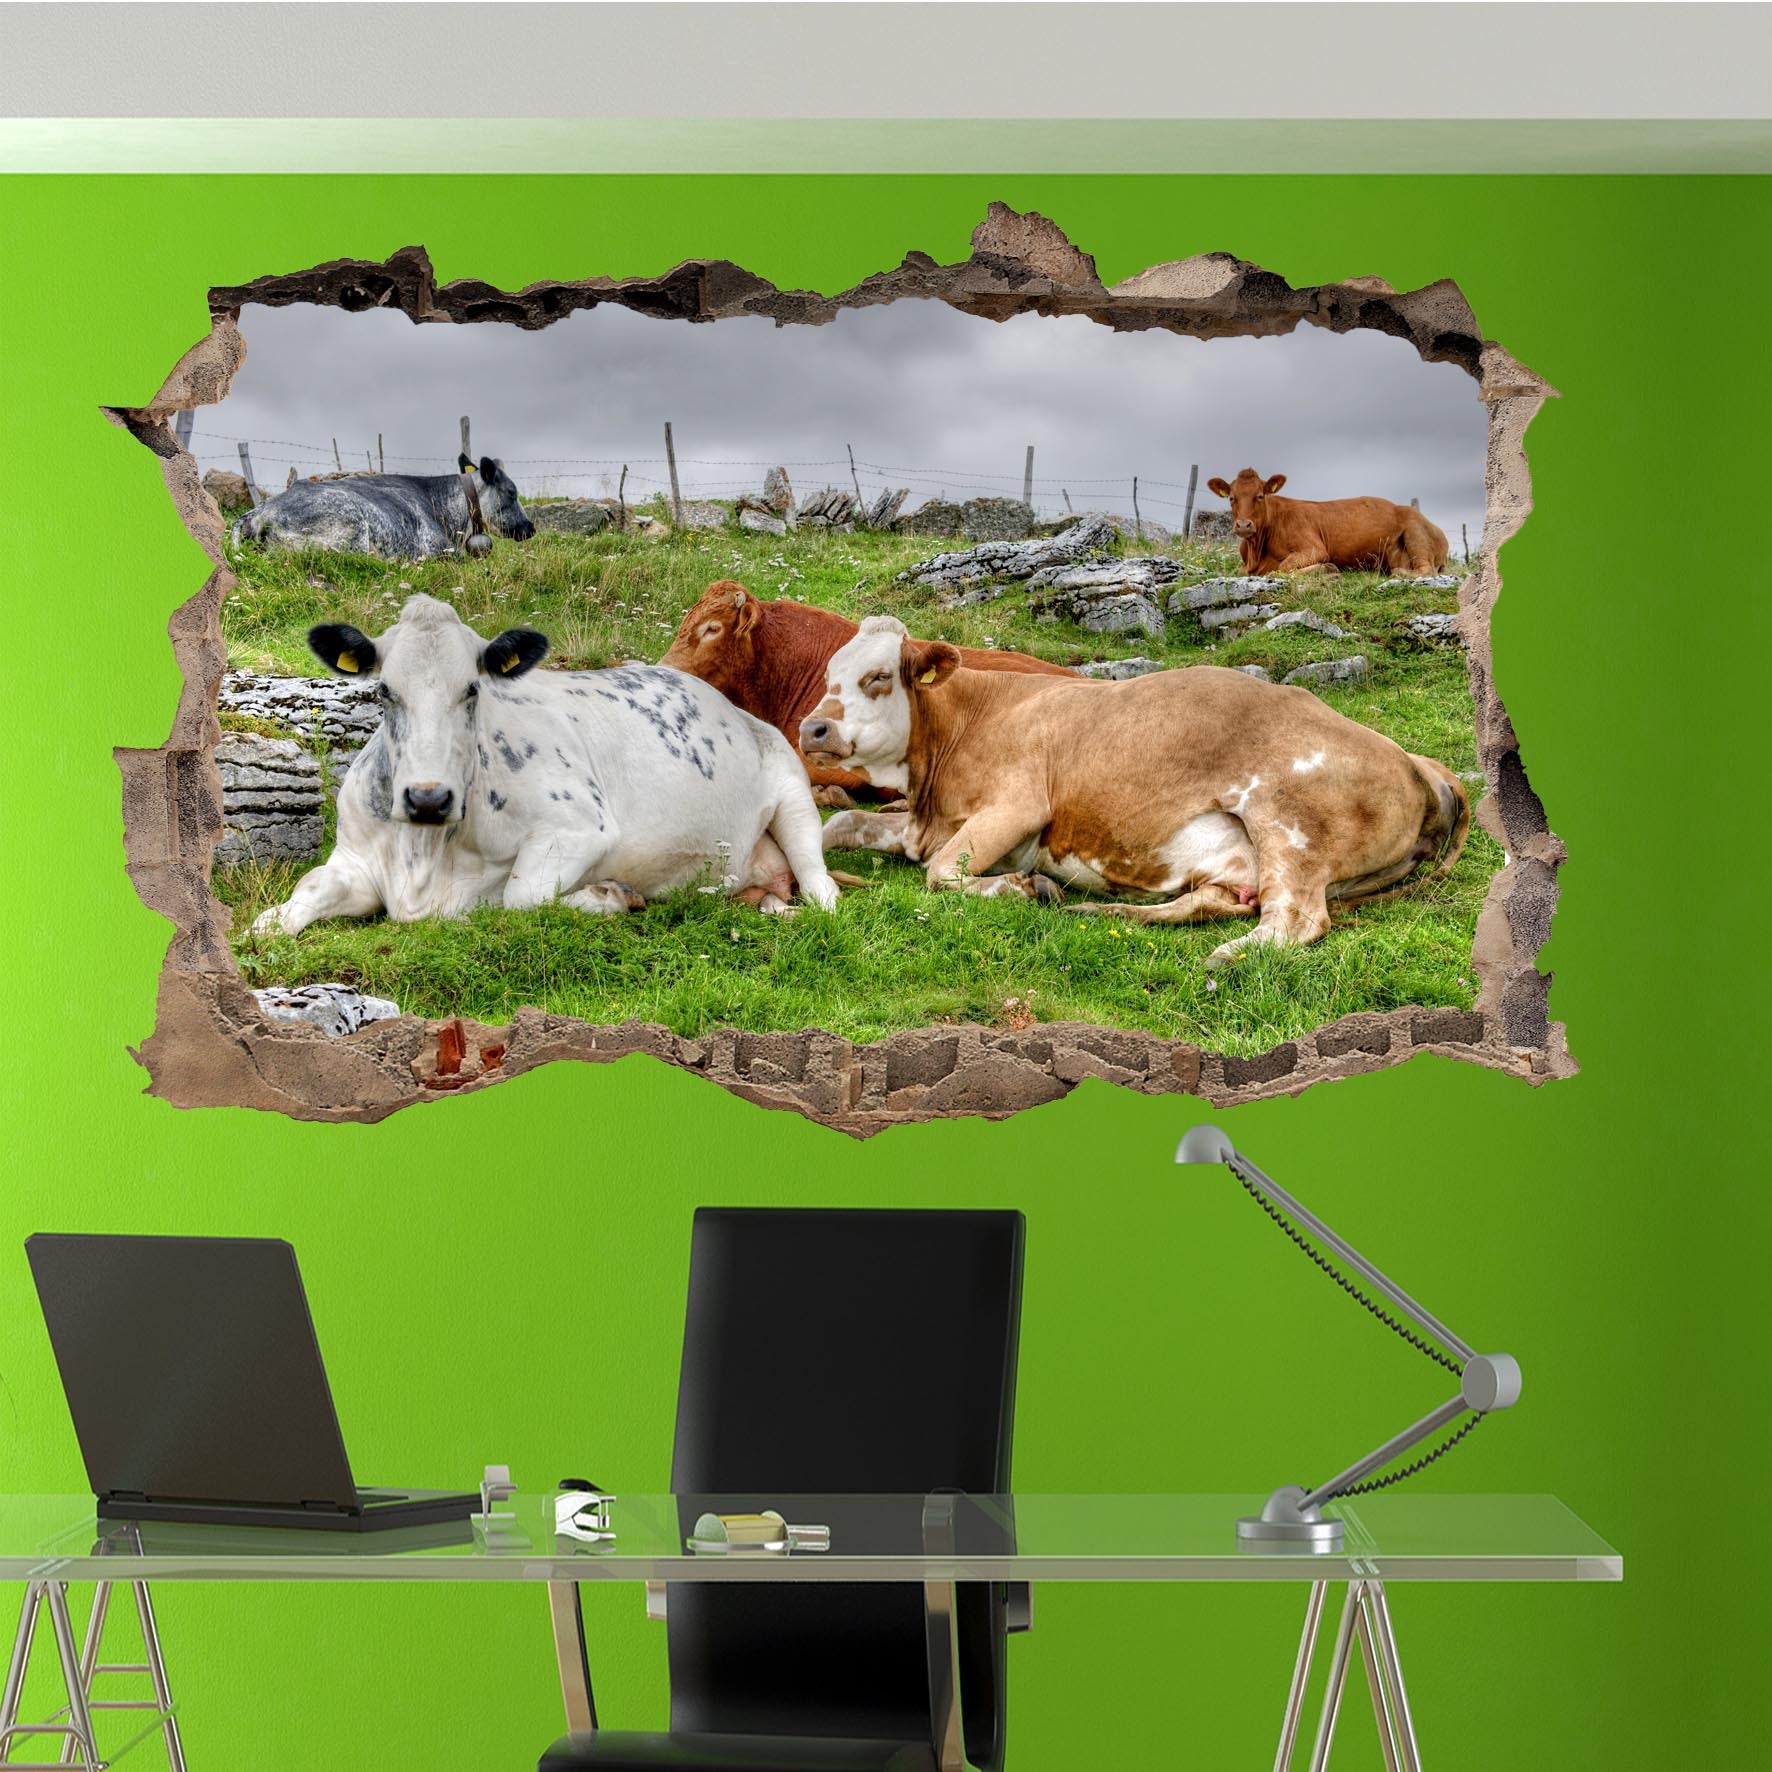 Cow and Cattle Wall Sticker Mural Decal Poster